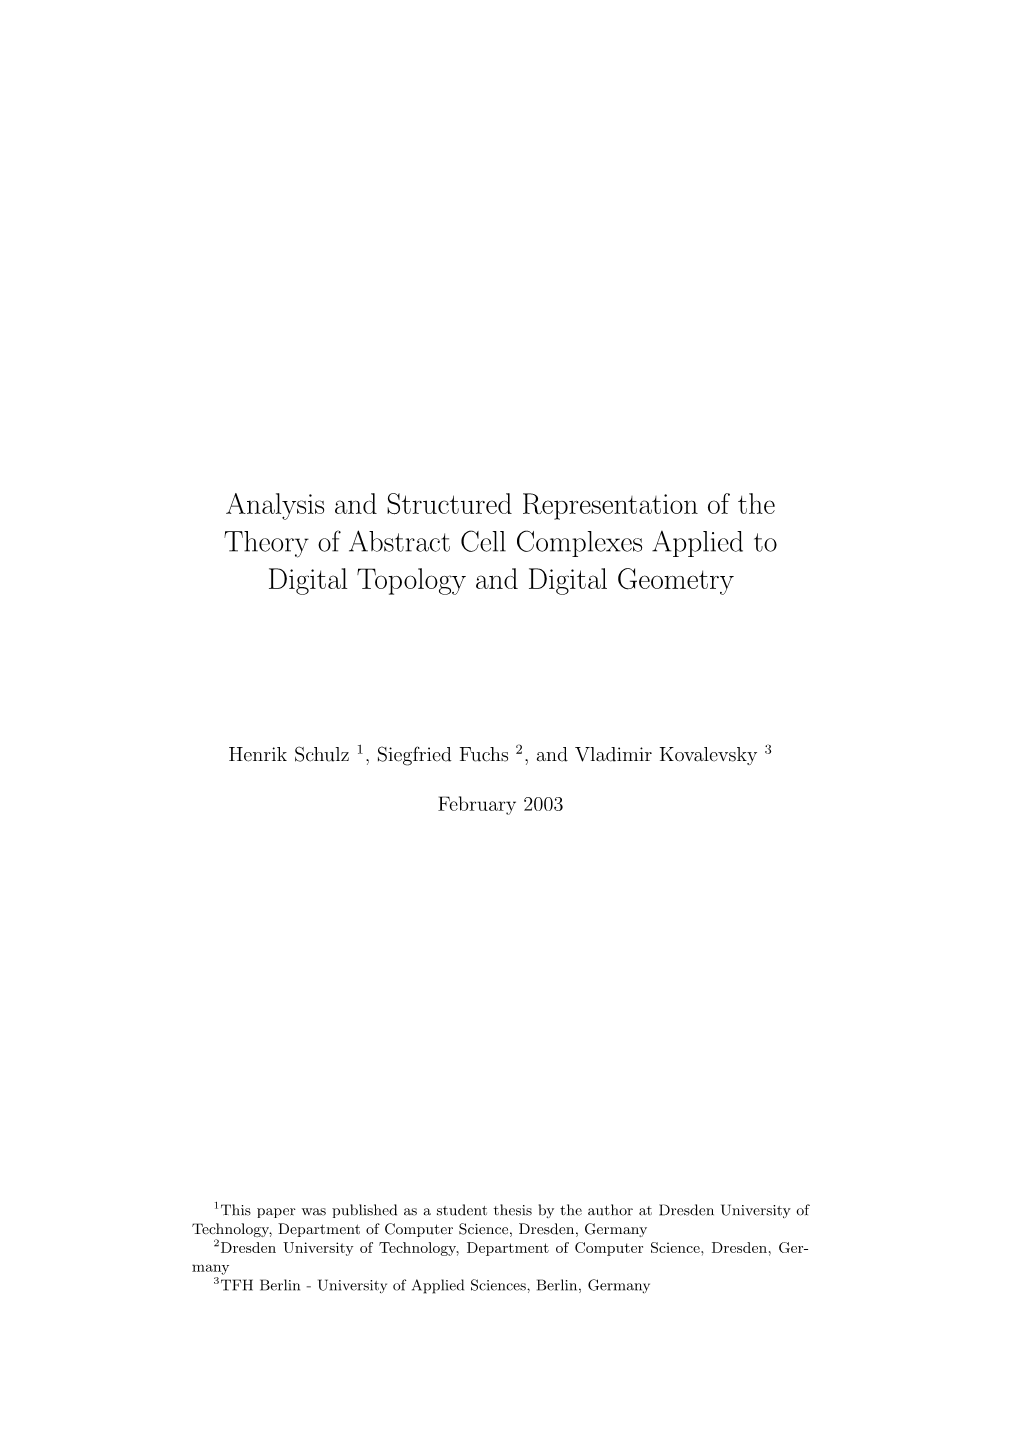 Analysis and Structured Representation of the Theory of Abstract Cell Complexes Applied to Digital Topology and Digital Geometry